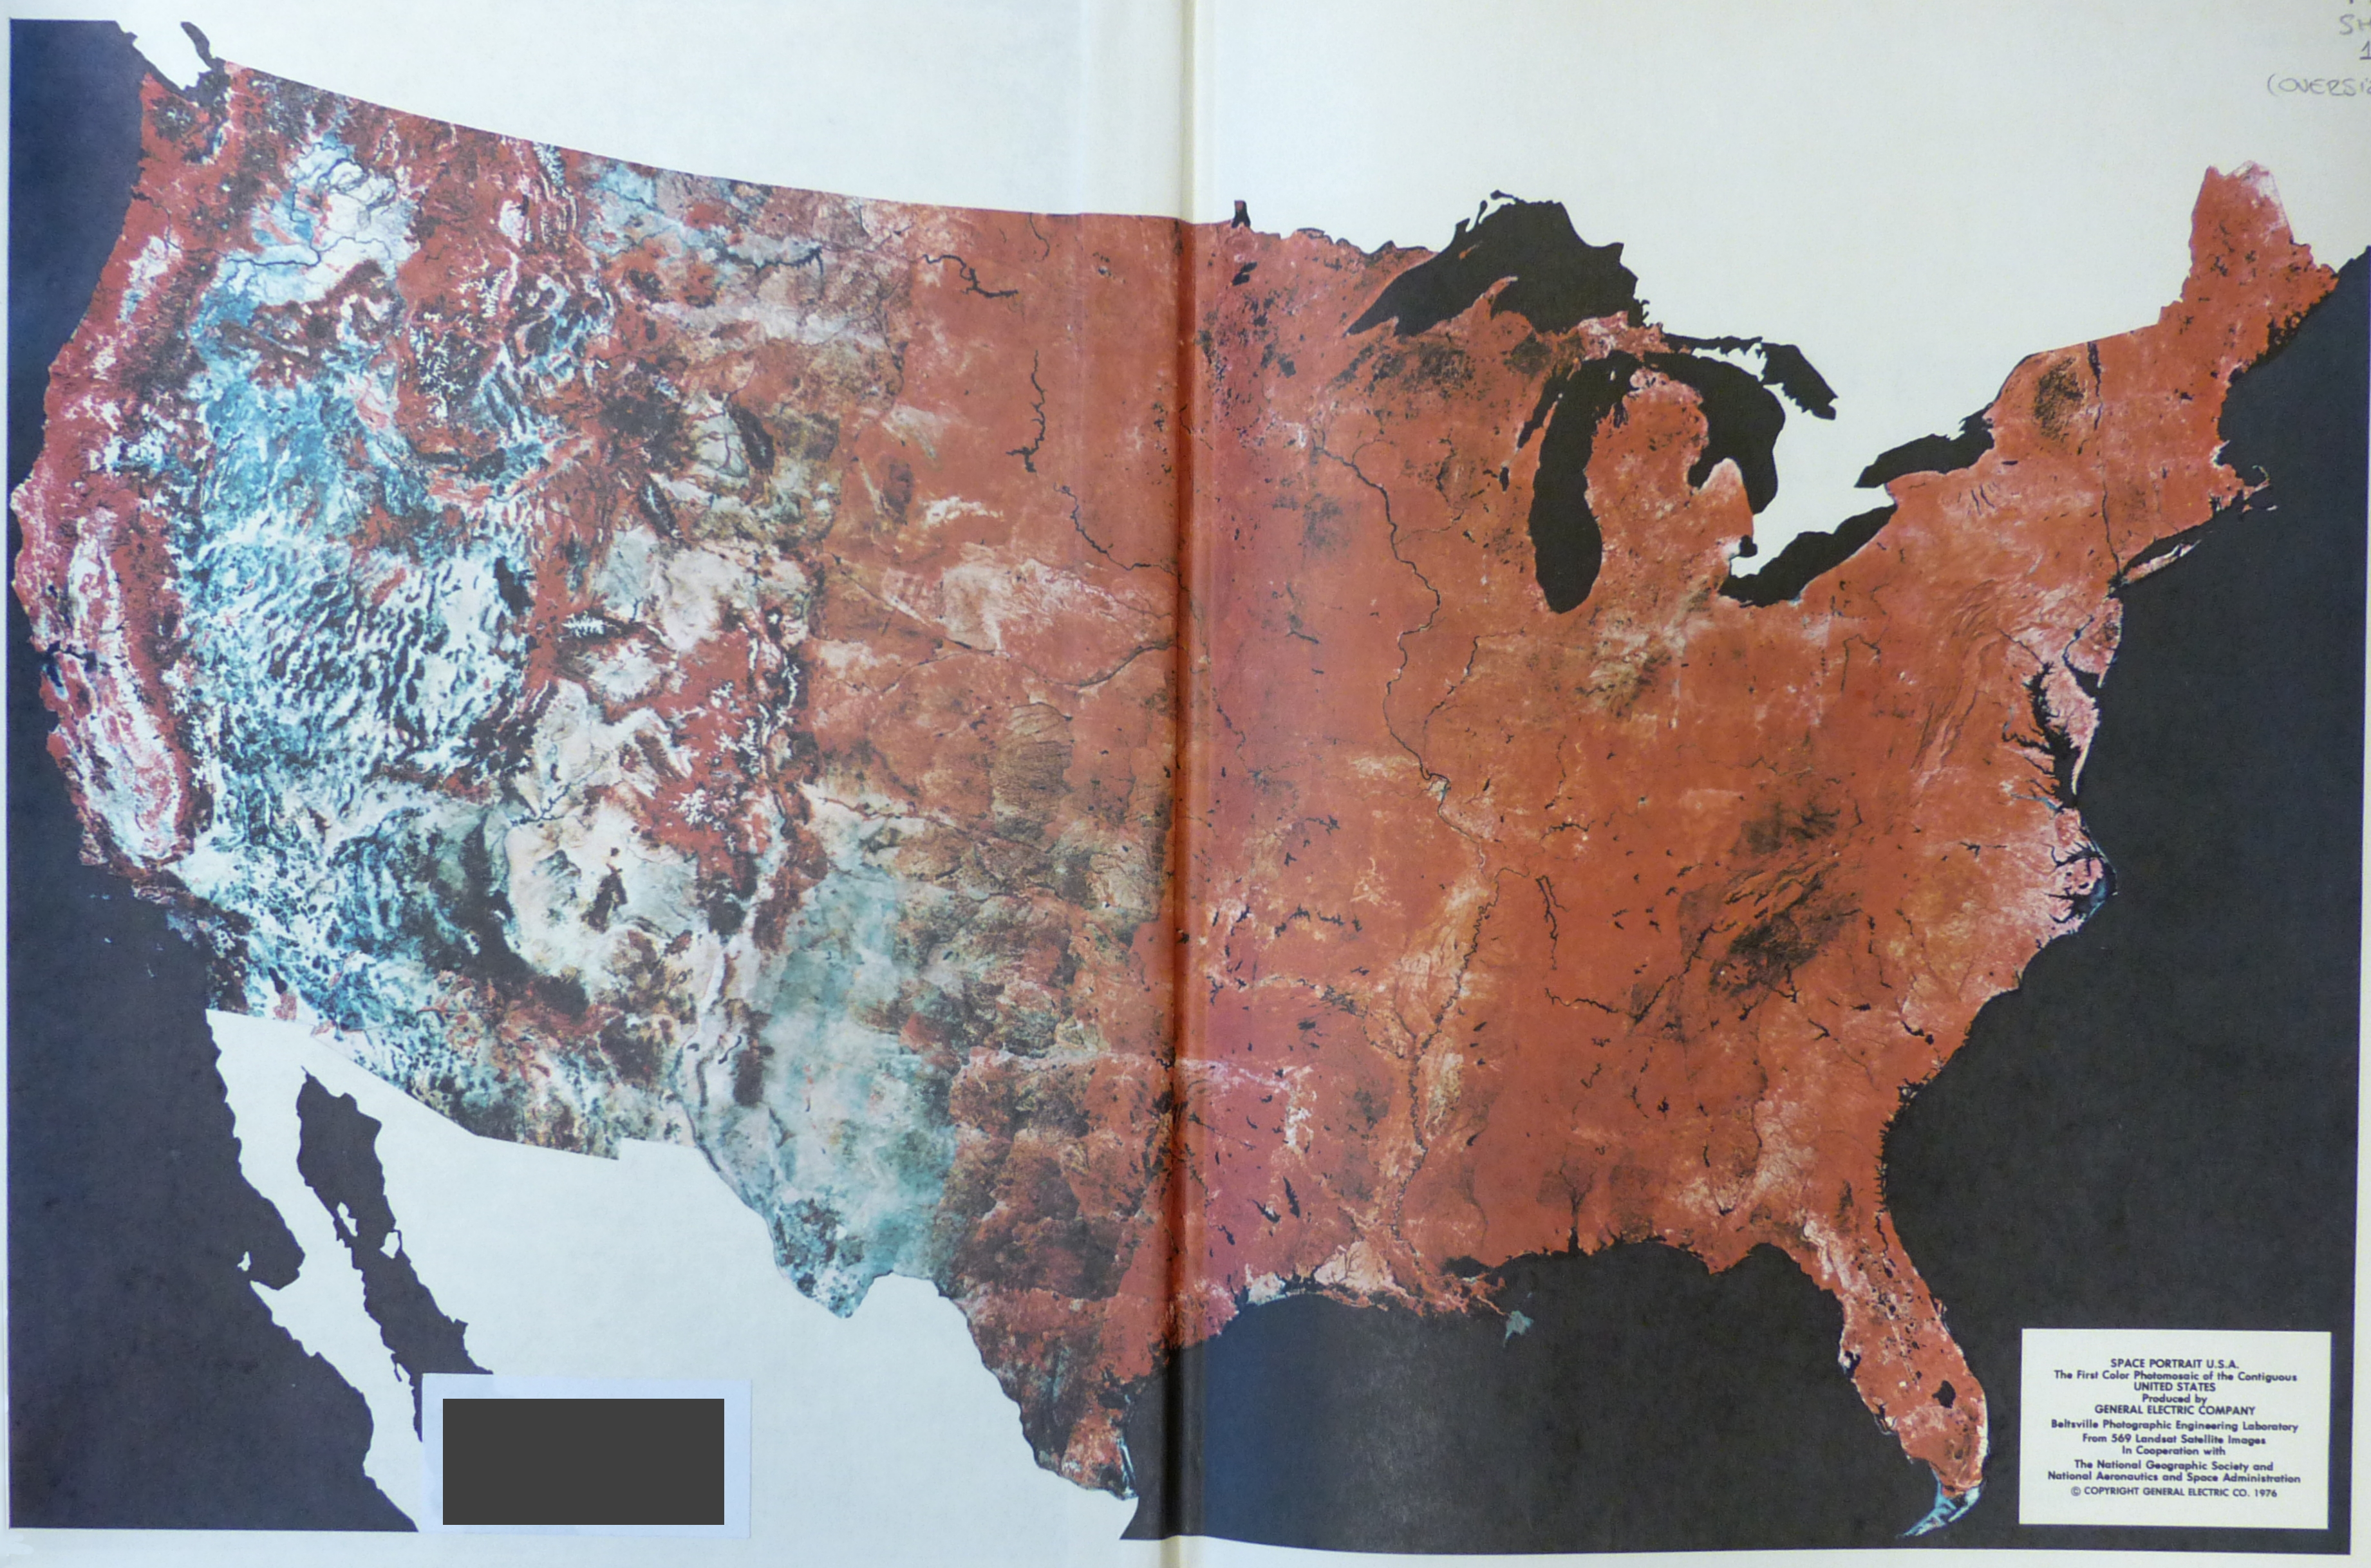 Colour photomosaic of the contiguous United States formed from 569 Landsat images, collected in Short (1976) Mission to Earth: Landsat Views the World